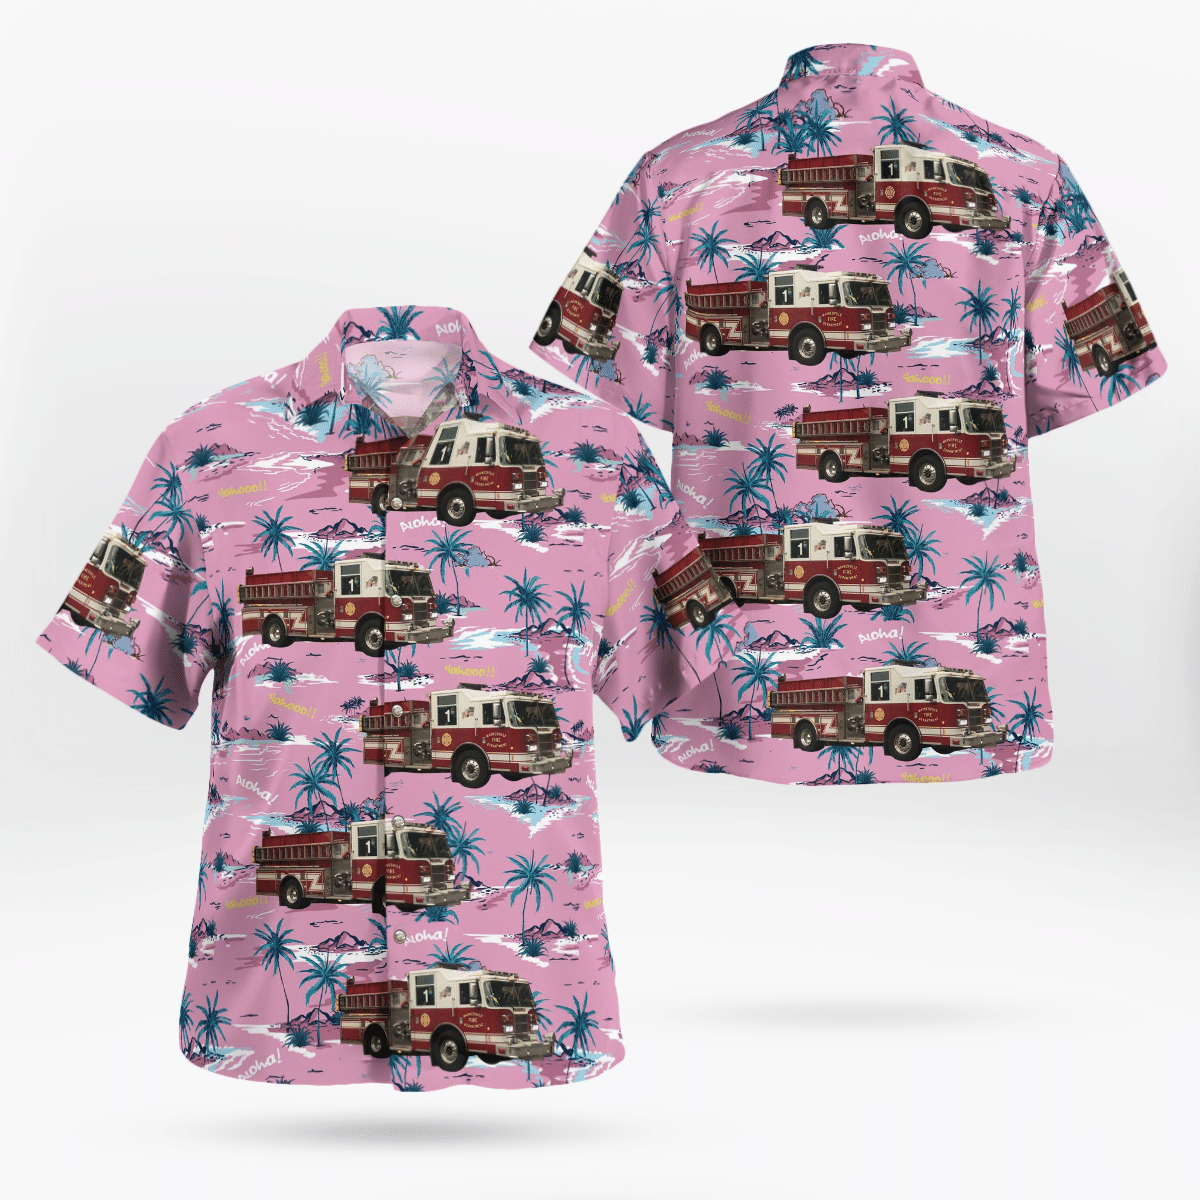 Shop now to find the perfect Hawaii Shirt for your hobby 5